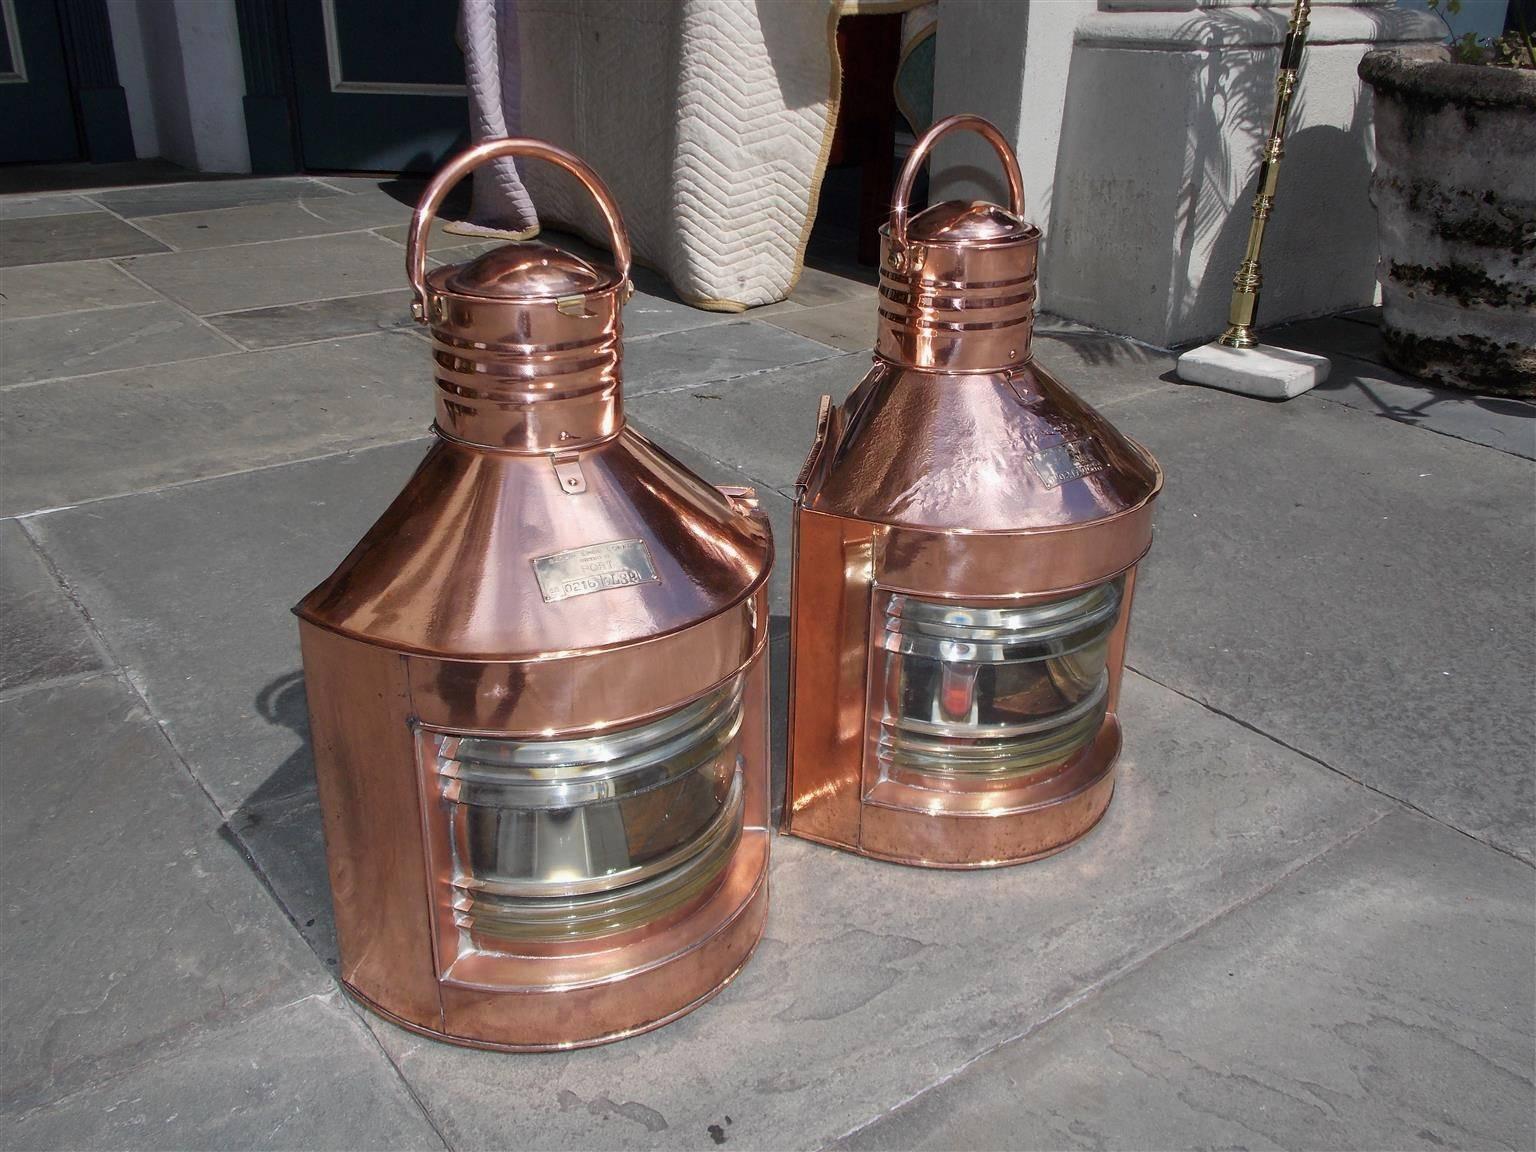 Pair of Anglo-Indian copper and brass port and starboard ship lanterns with the original Fresnel lenses, vented tops, stamped badges, carrying handles and rear sliding doors with handles and mounting brackets. Lanterns have been electrified. Sachin